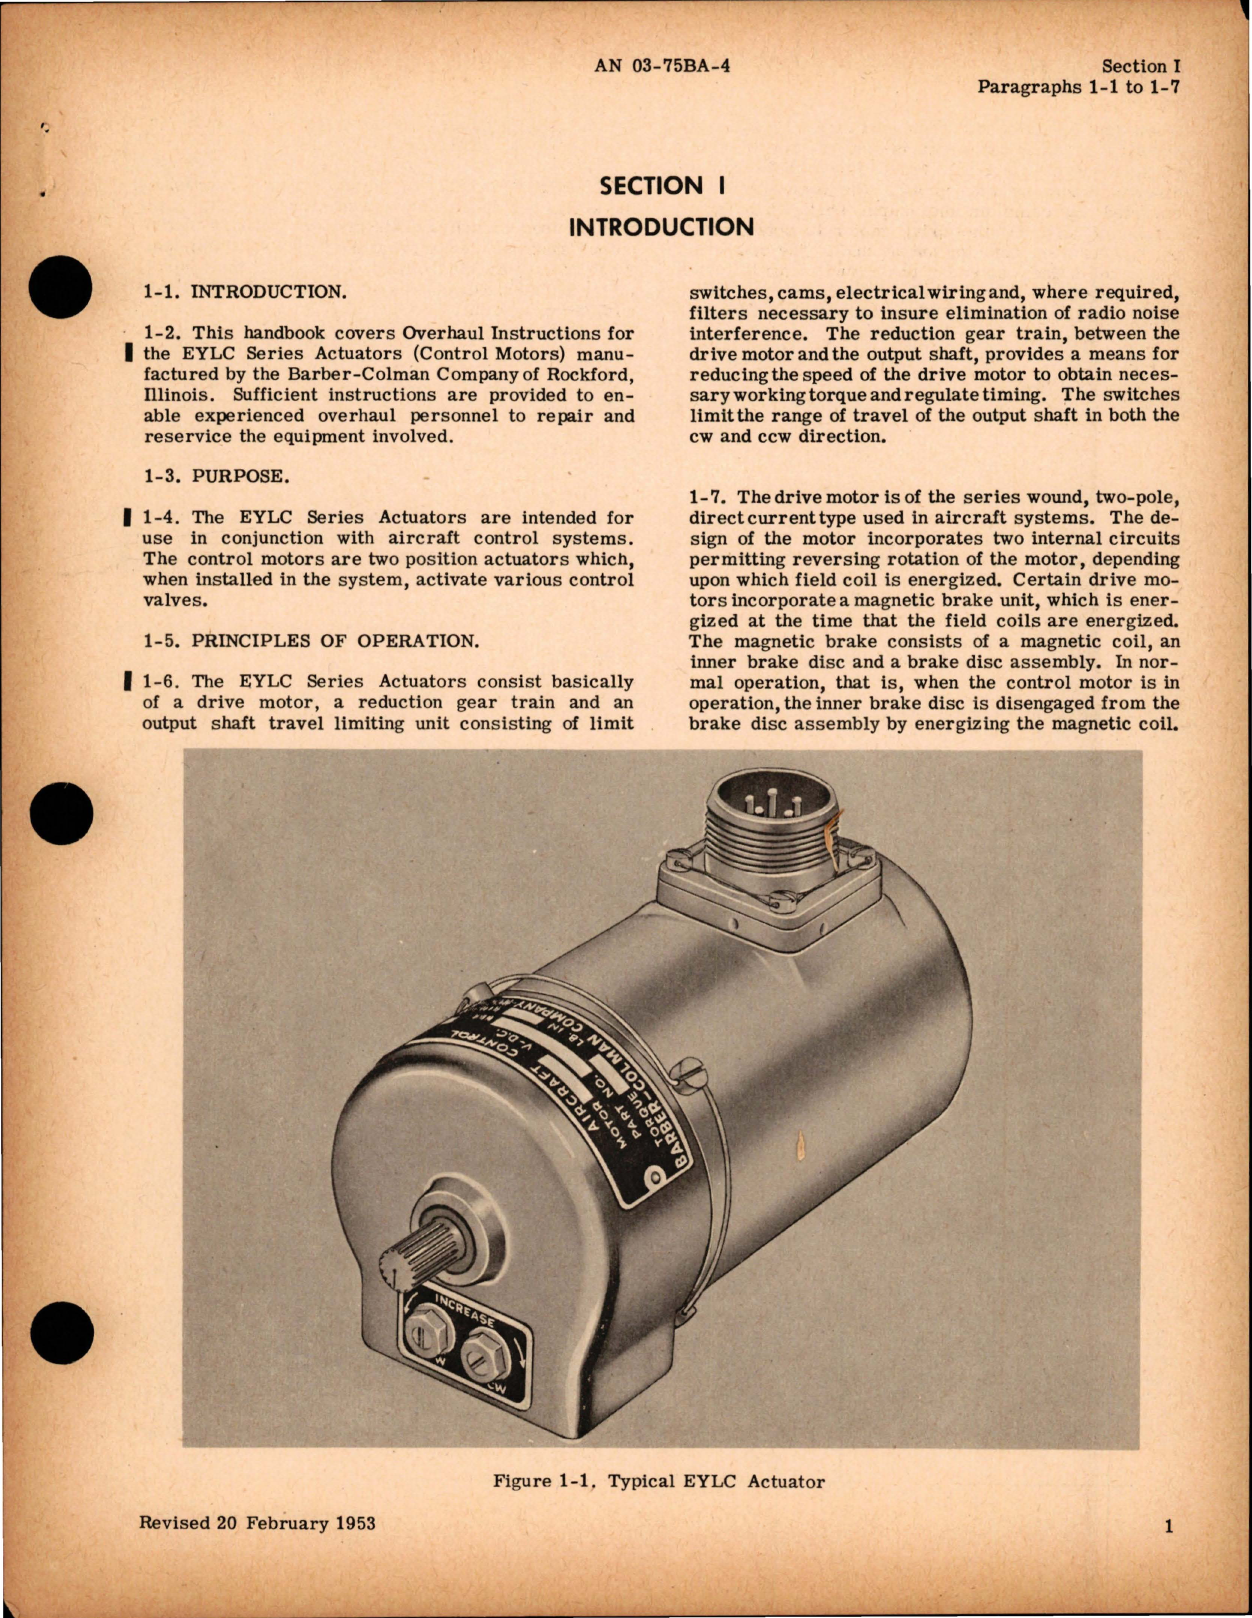 Sample page 5 from AirCorps Library document: Overhaul Instructions for Aircraft Actuators - Part EYLC Series